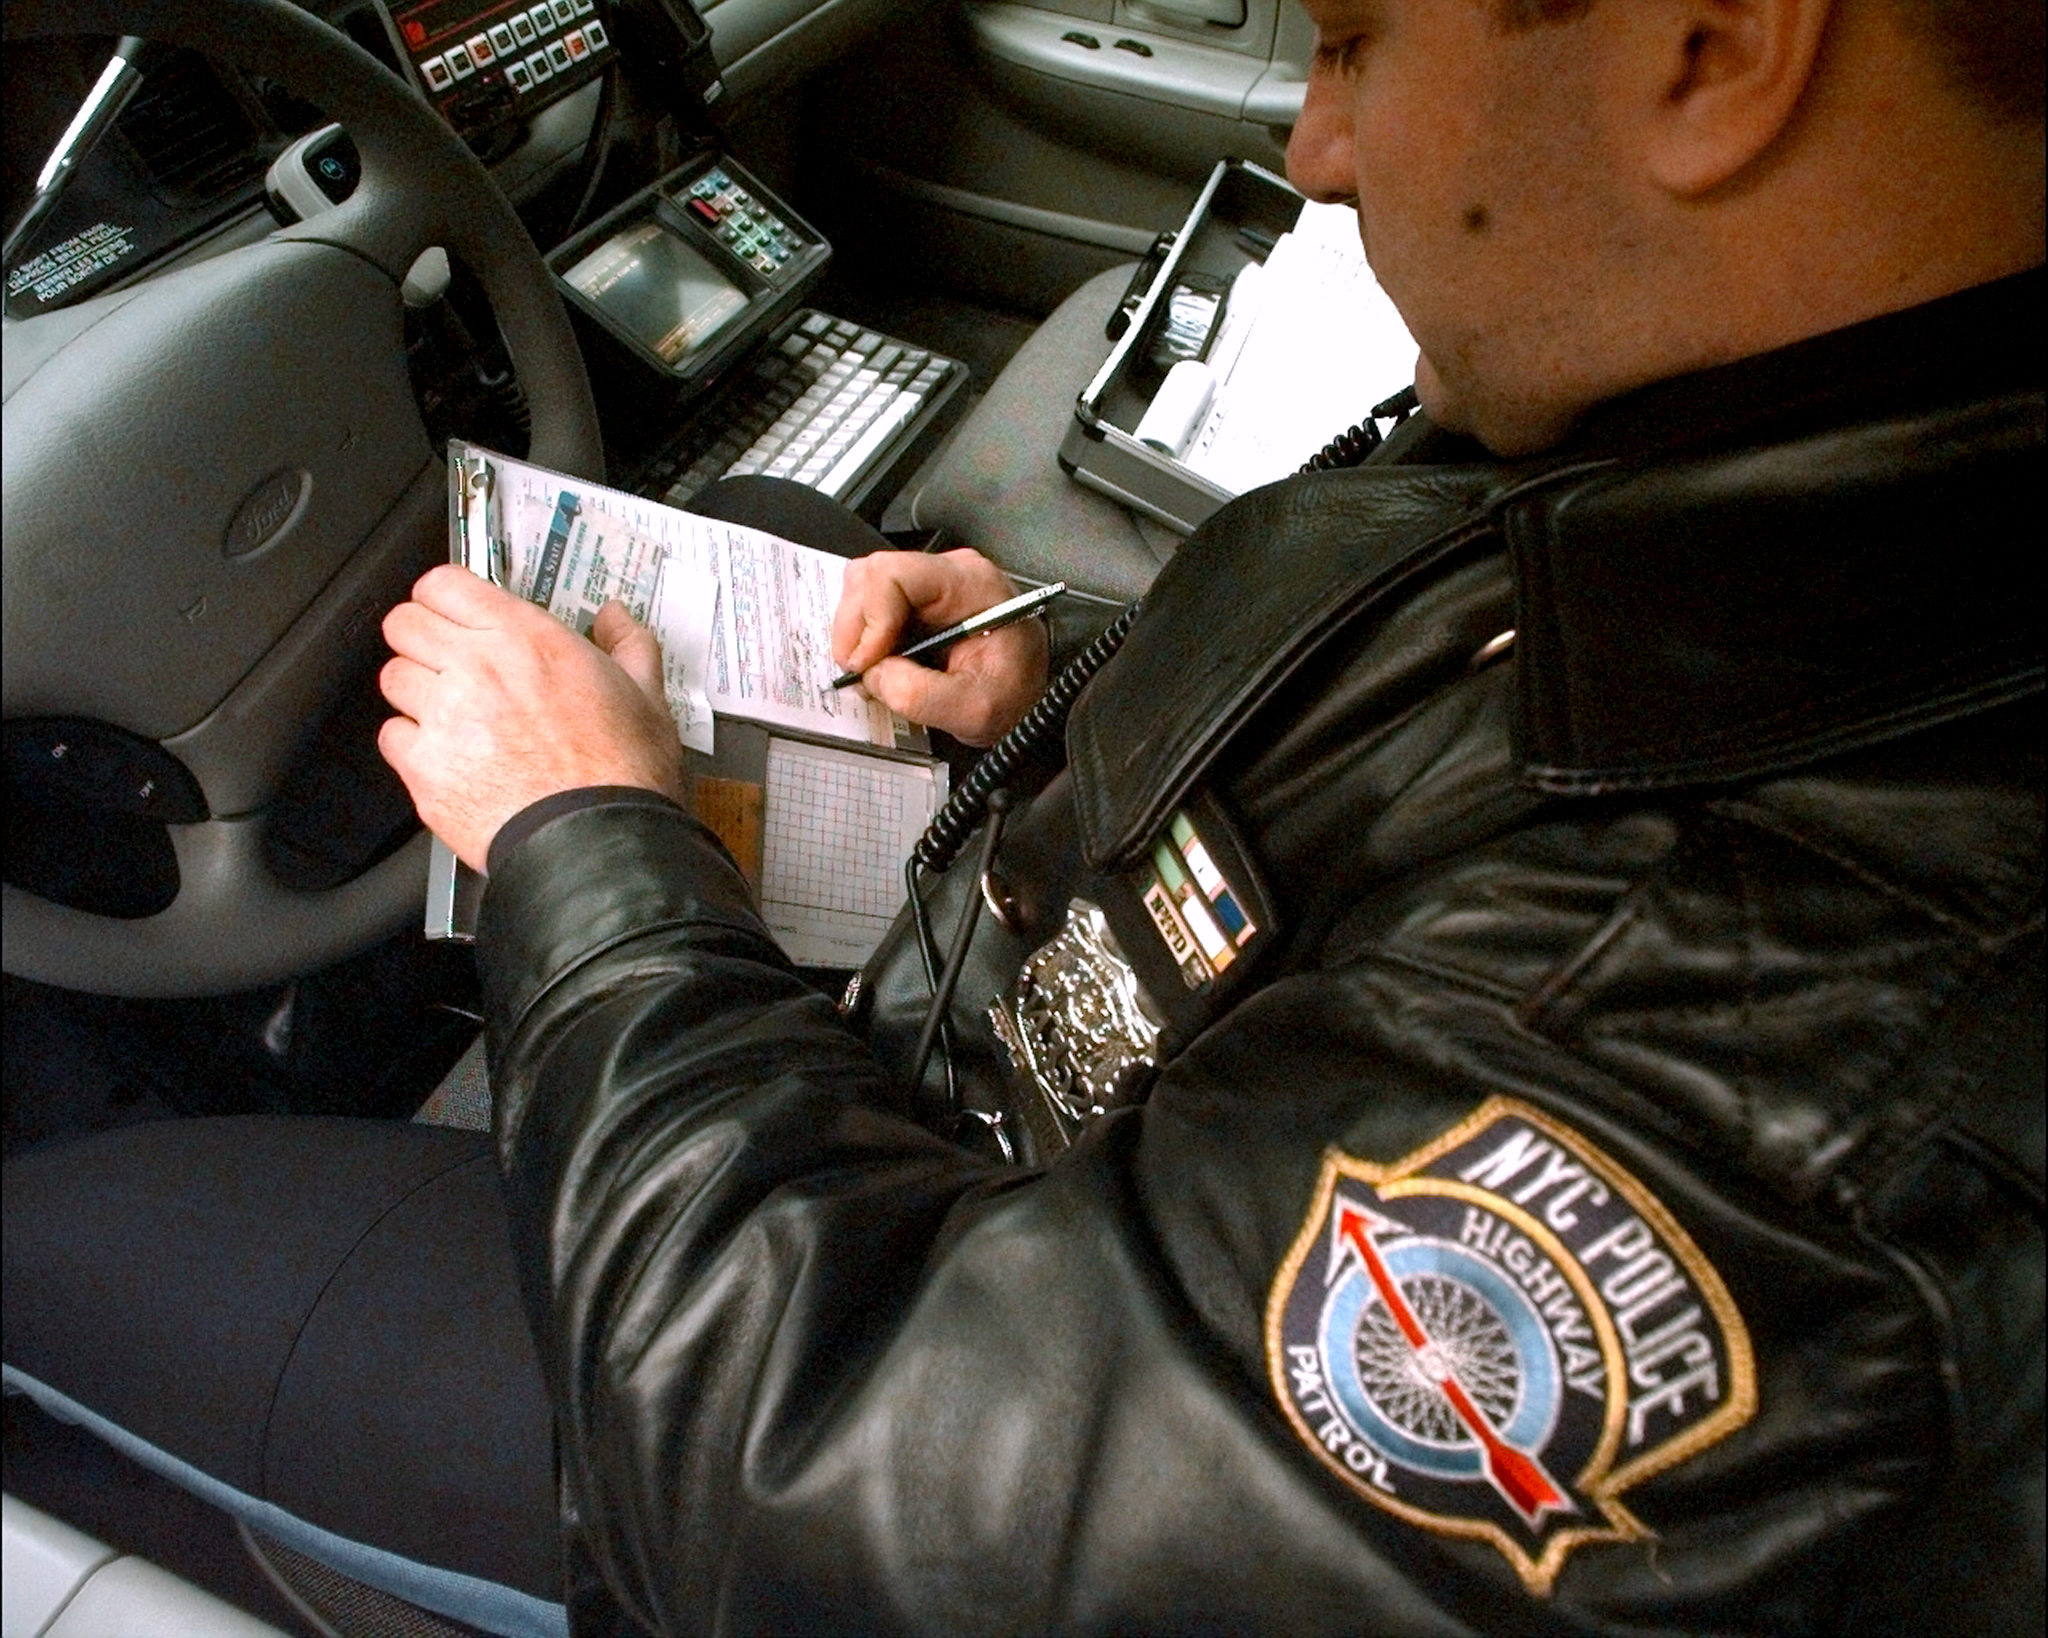 A police officer writes a ticket